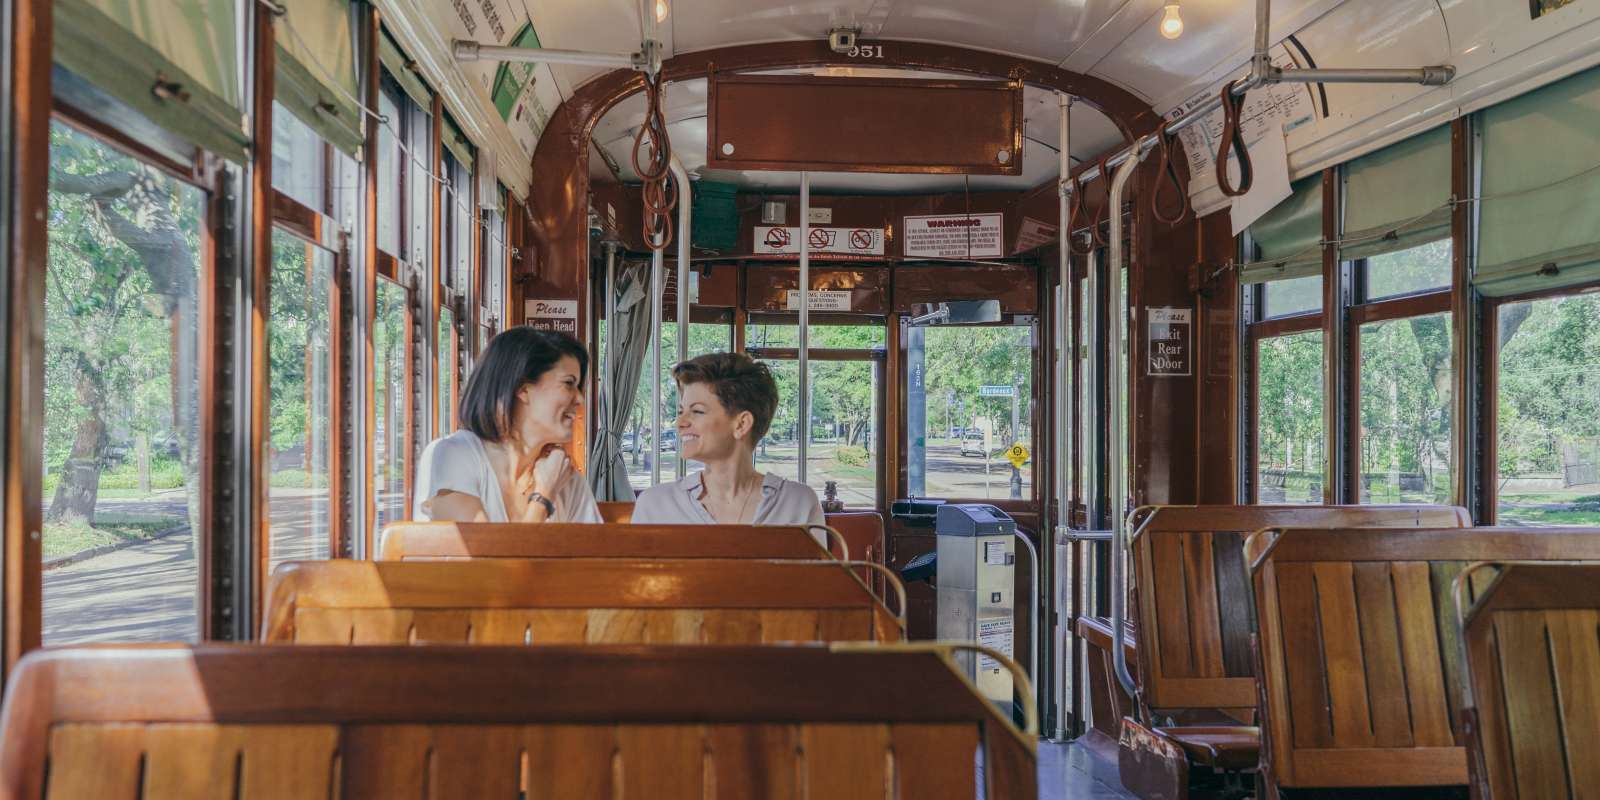 A Leisurely Ride on the St. Charles Avenue Streetcar